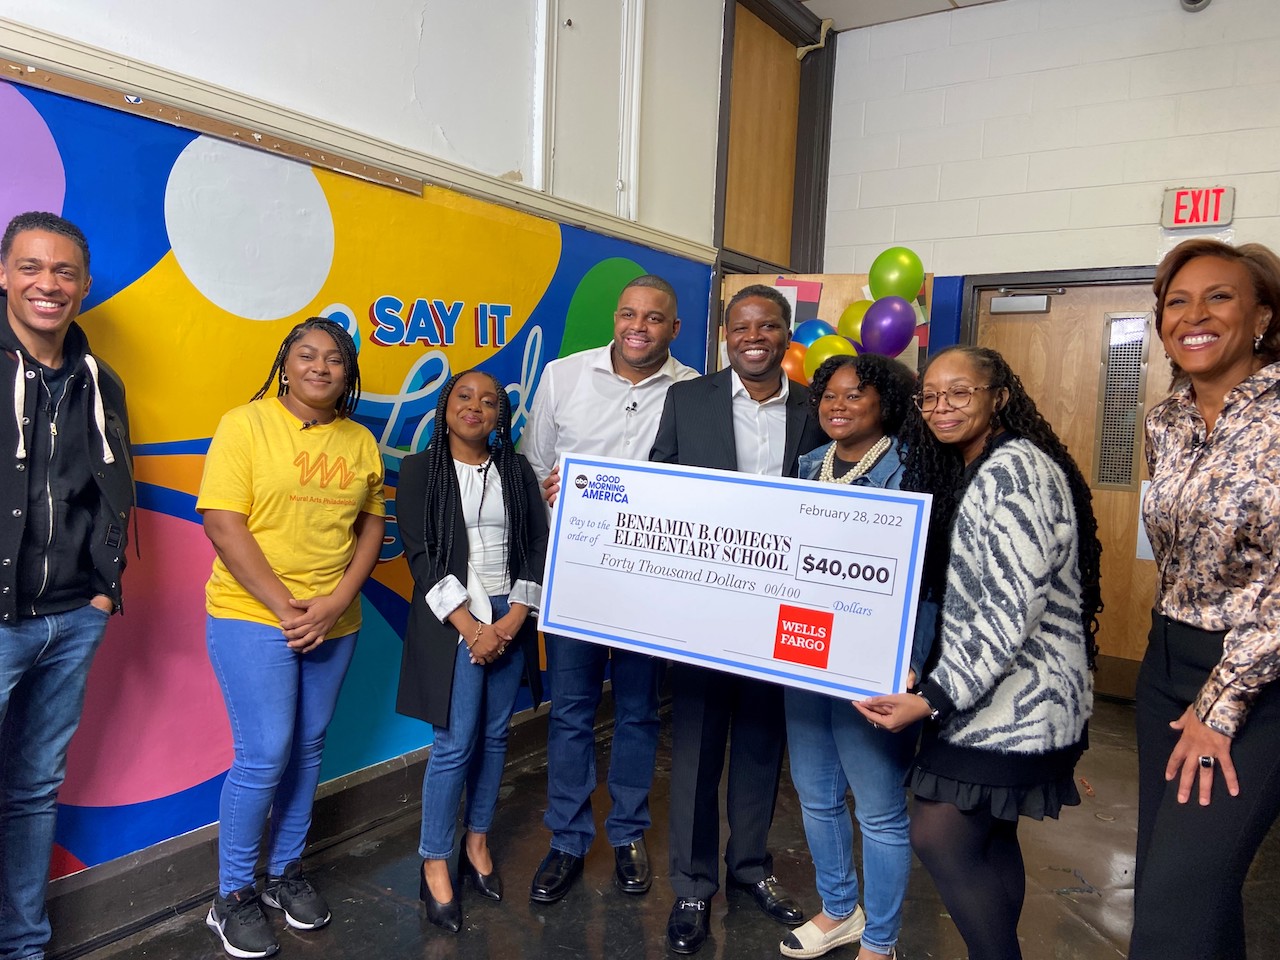 (From L to R) T.J. Holmes, Jamee Grigsby, Quinta Brunson, Mr. Robinson, Stephen Briggs, Xiomarra Robinson, Ms. Dupree (Comegys principal), Robin Roberts. Photo: Comegys Elementary School